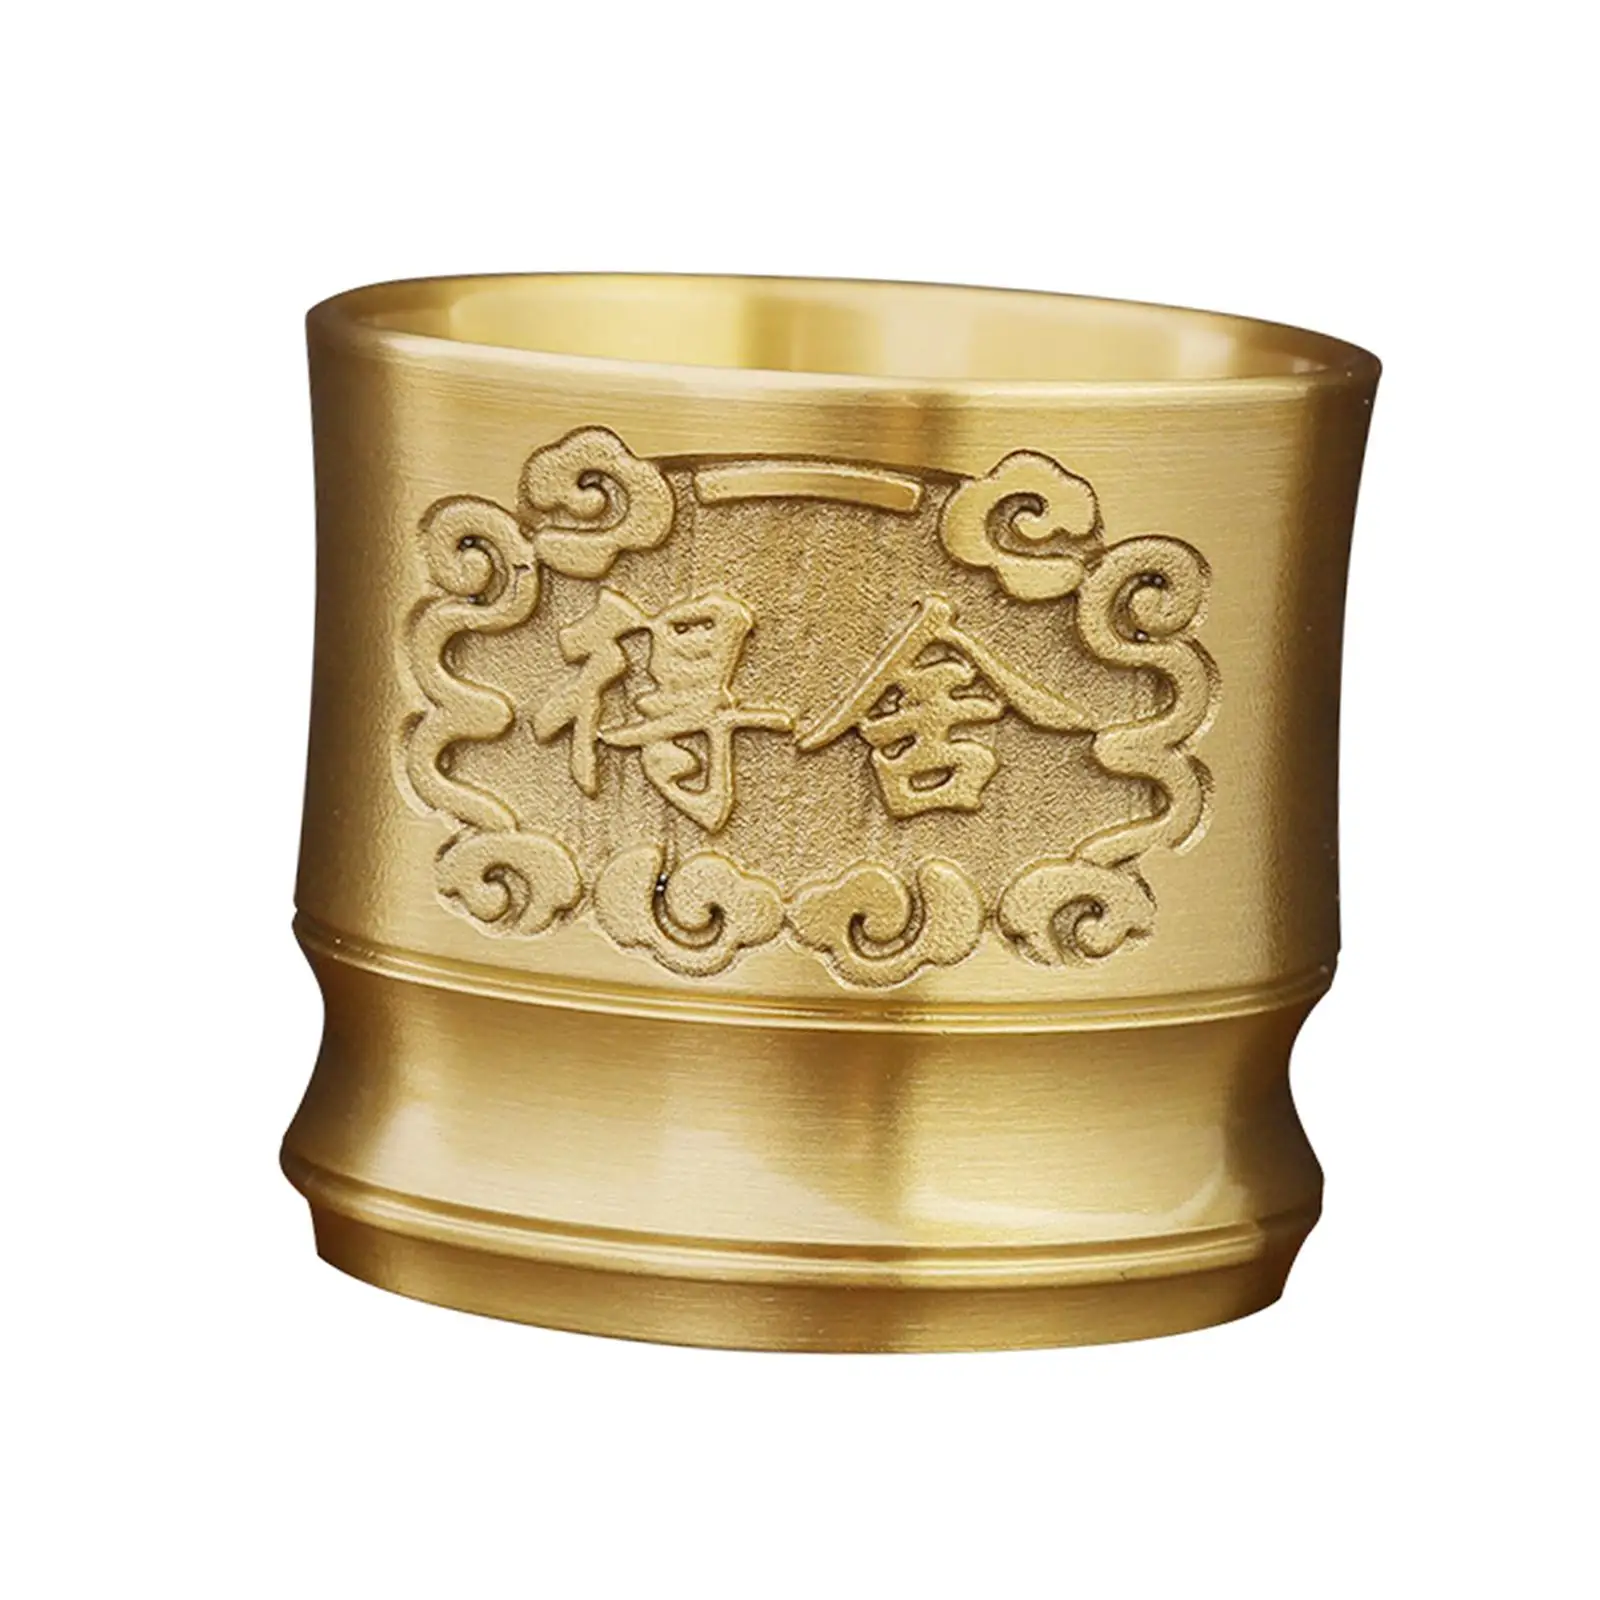 Brass Cup Engraved Drinking Cup Teacup for Desk Decoration Holiday Gift